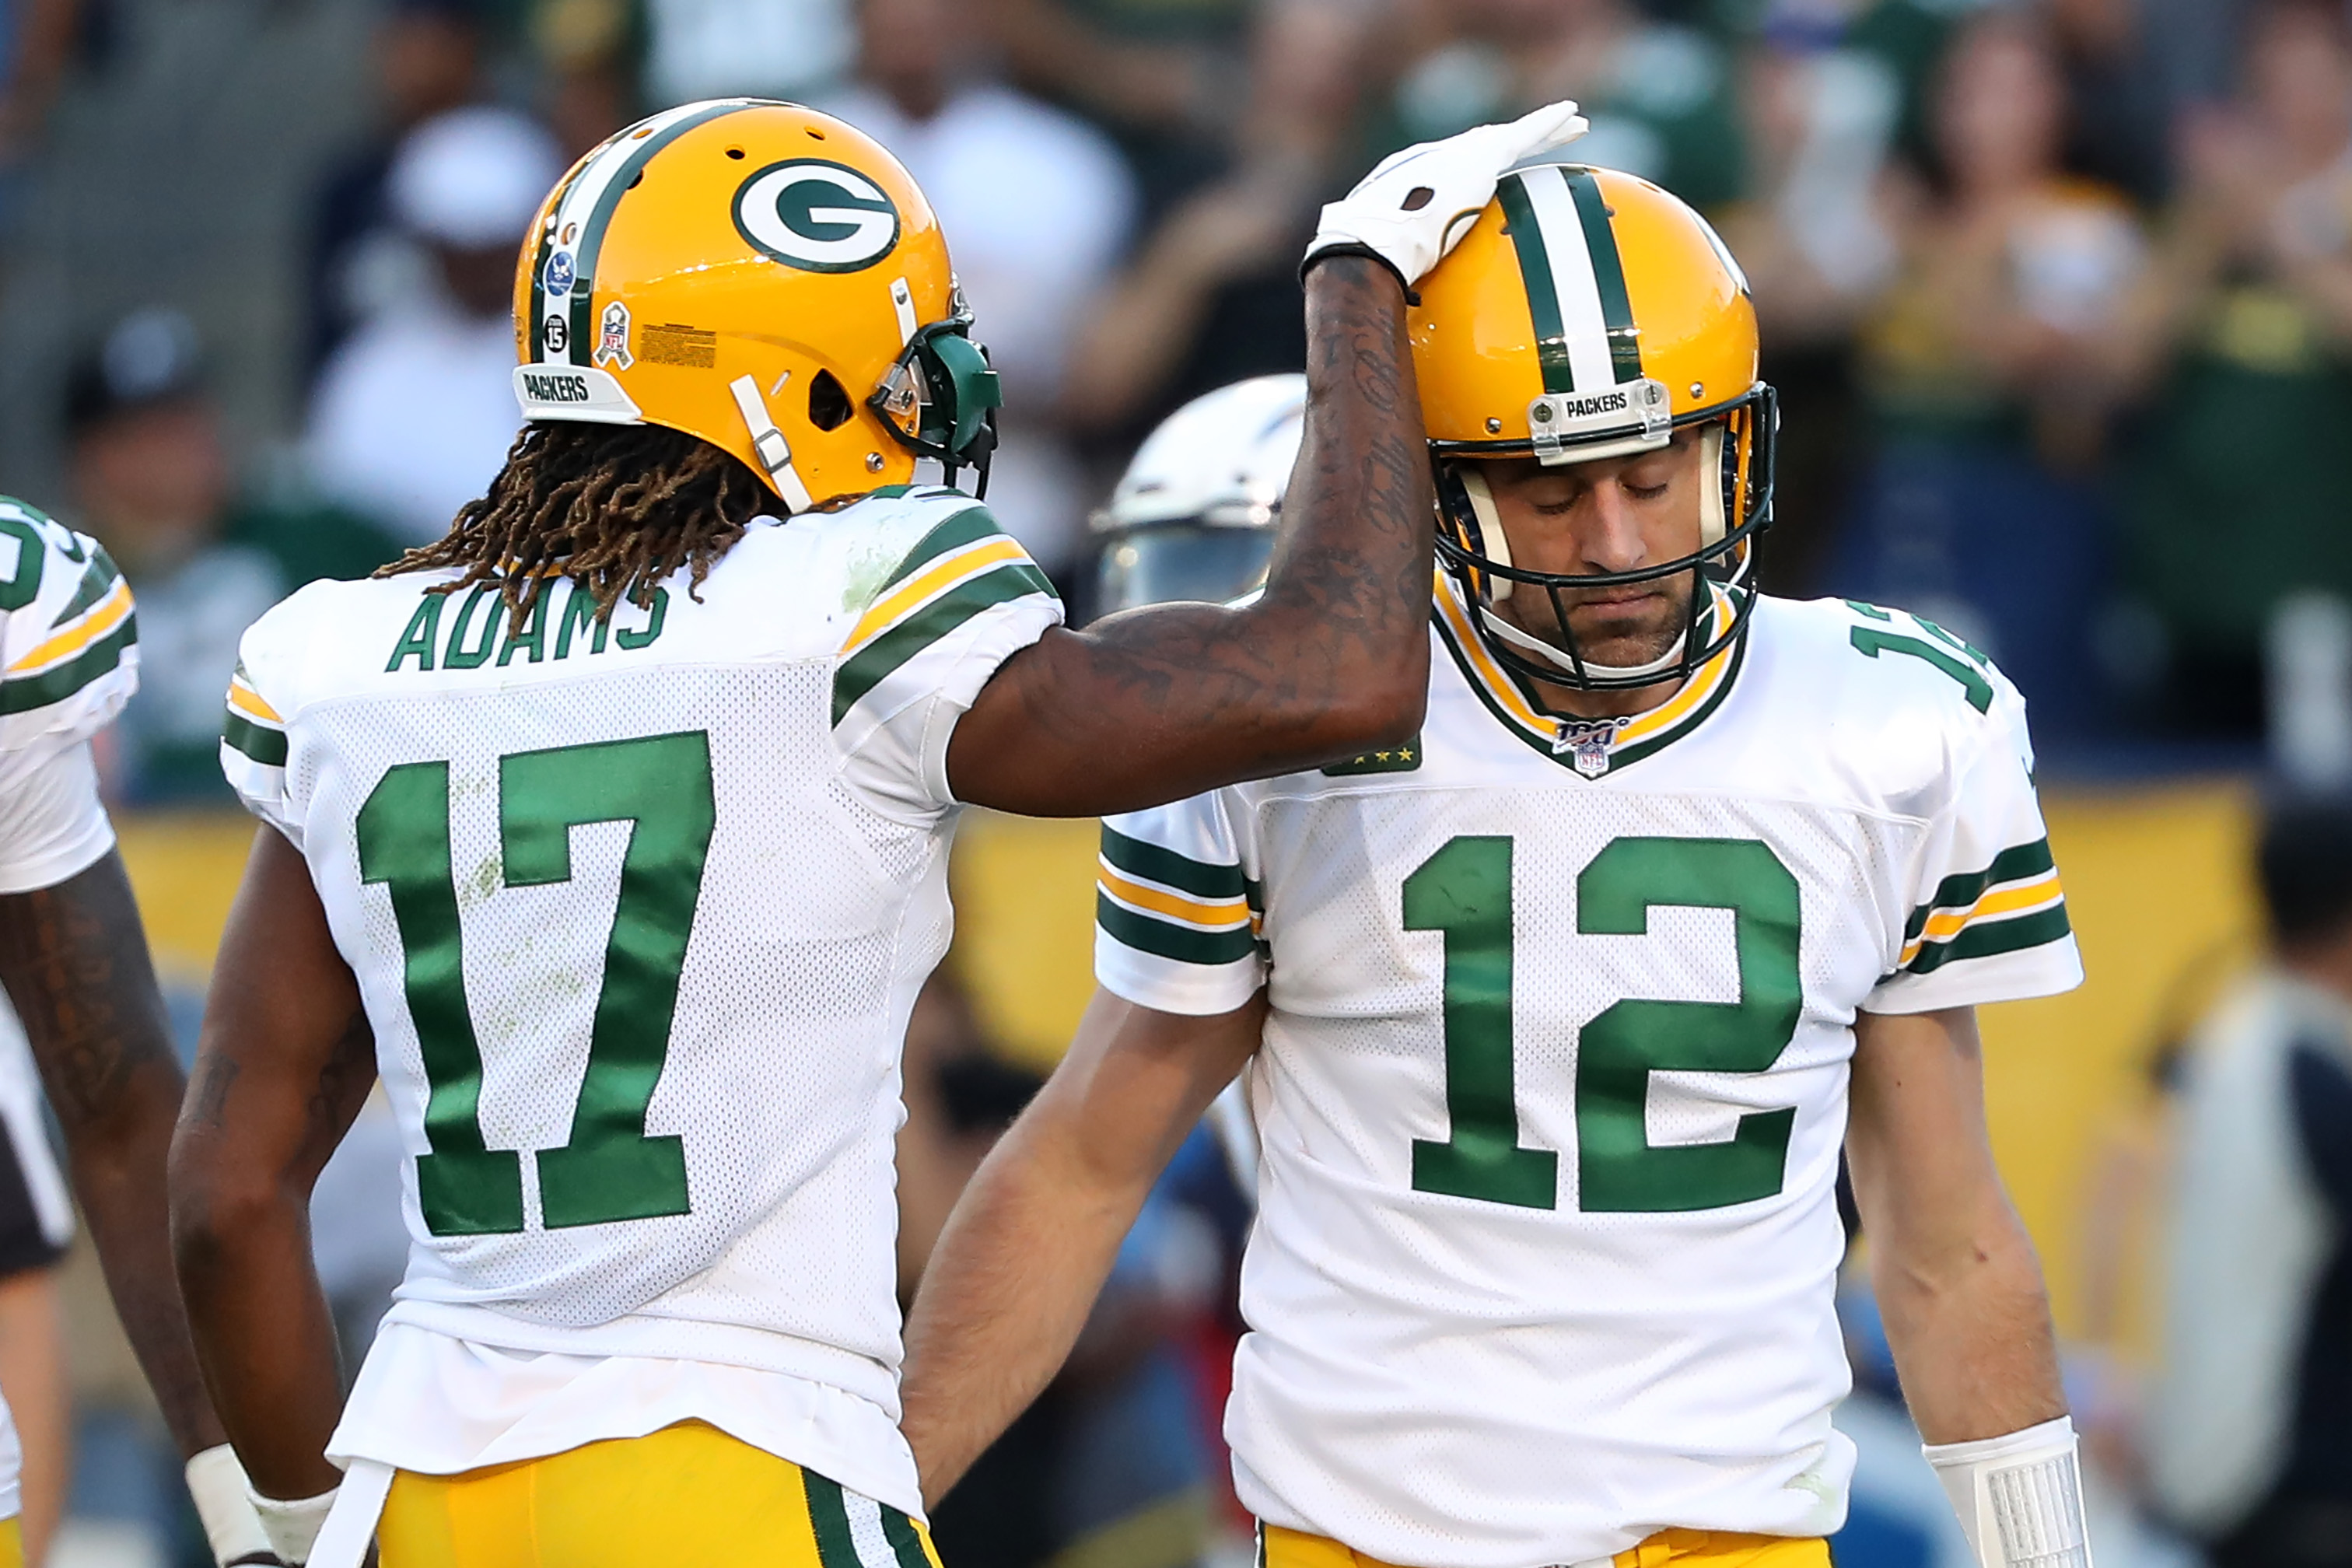 Davante Adams congratulates Aaron Rodgers of the Green Bay Packers after scoring a two-point conversion during the second half of a game against the Los Angeles Chargers at Dignity Health Sports Park on November 03, 2019 in Carson, California.